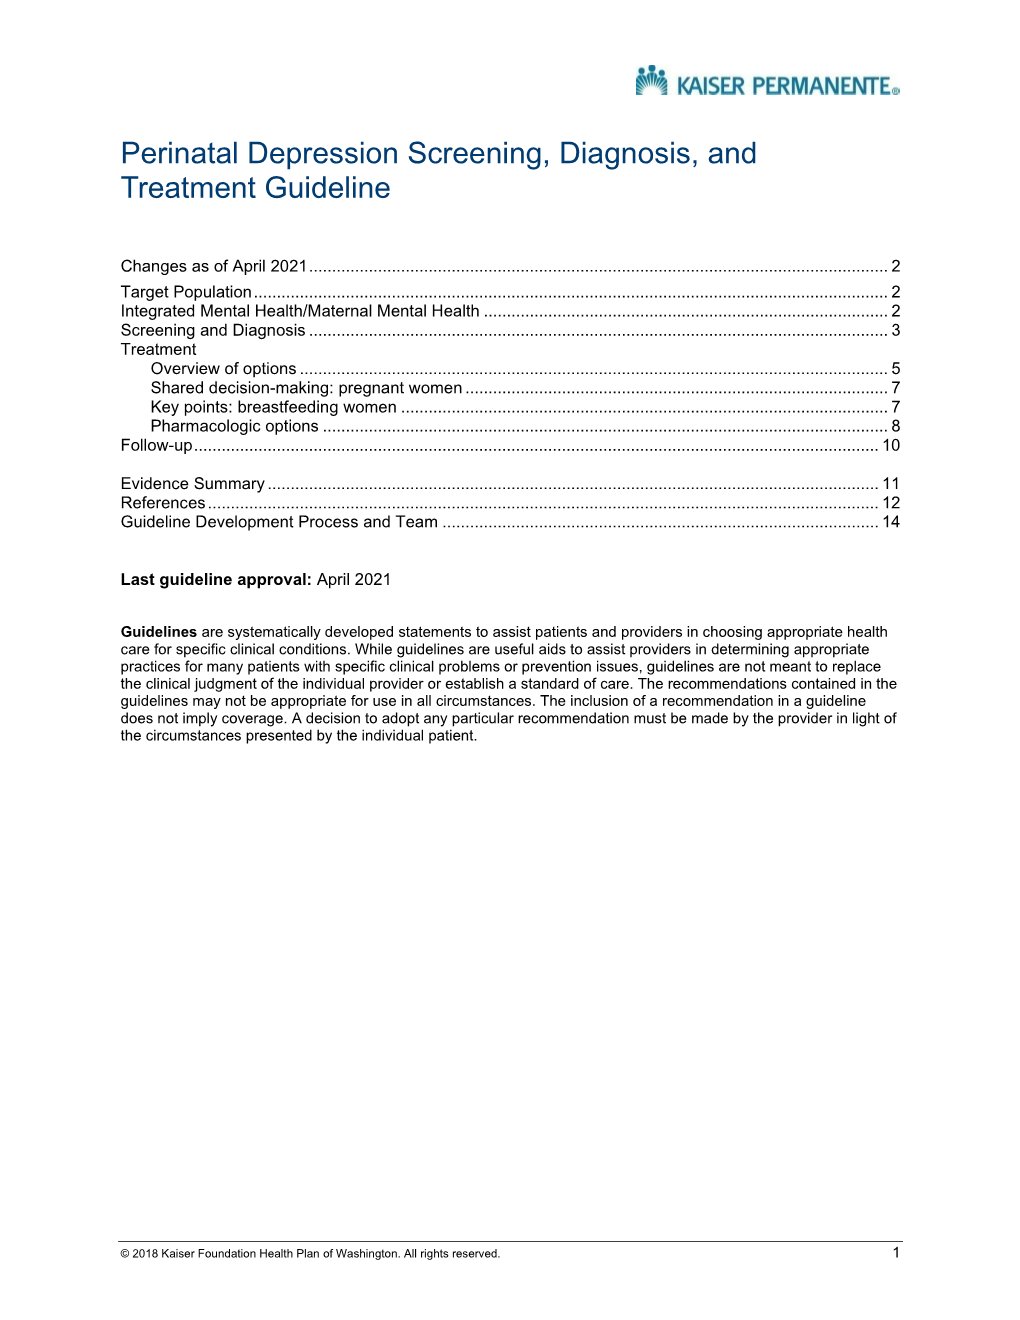 Perinatal Depression Screening, Diagnosis, and Treatment Guideline